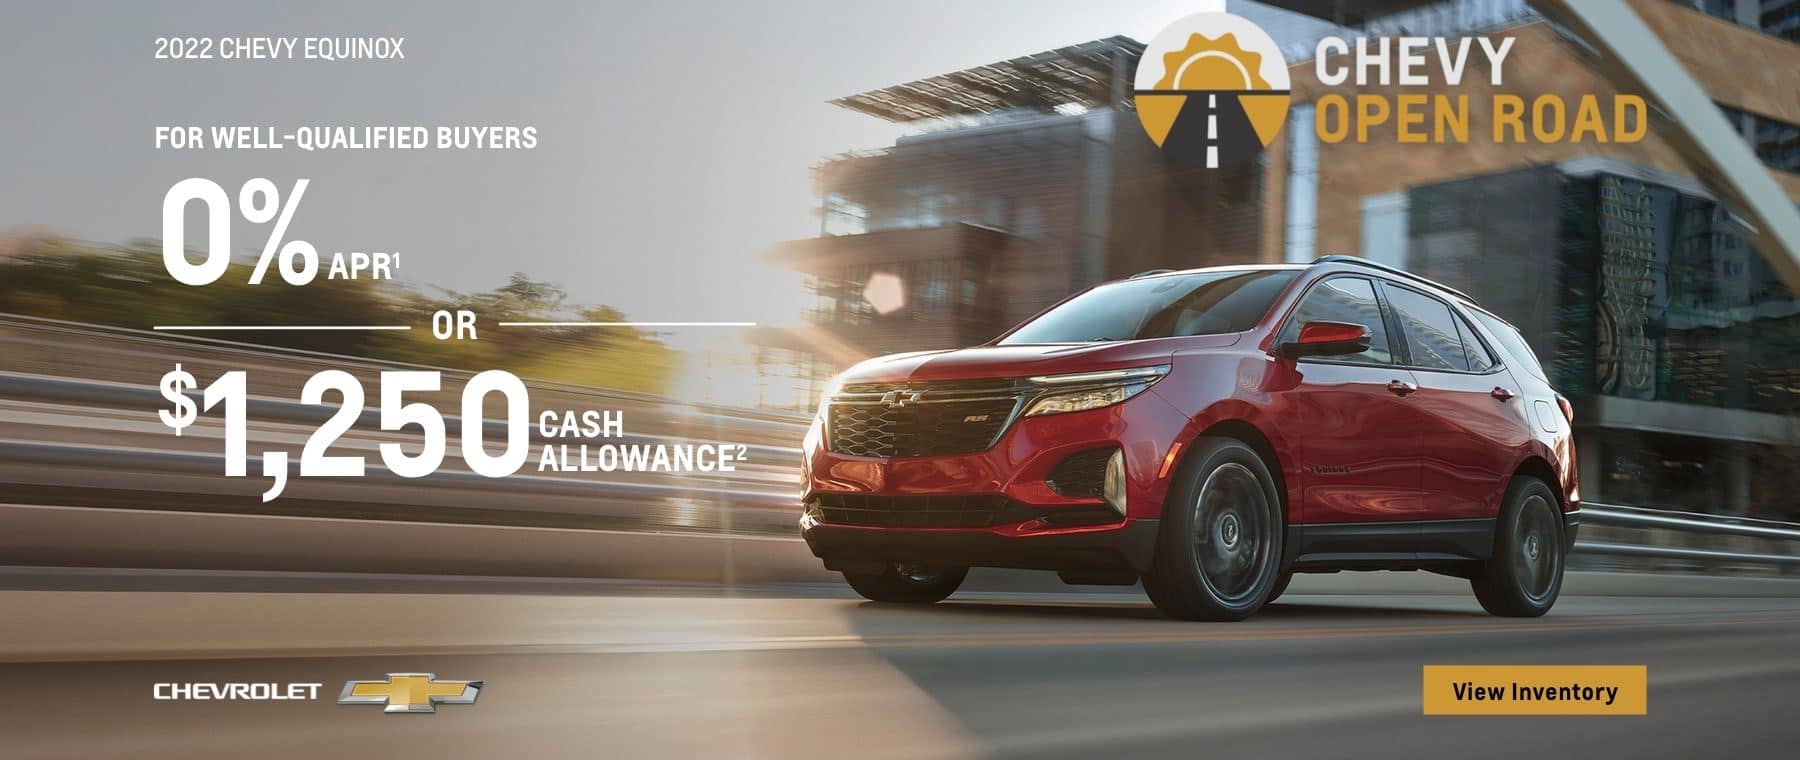 2022 Chevy Equinox. Chevy Open Road. For well-qualified buyers 0% APR. Or, $1,250 cash allowance.